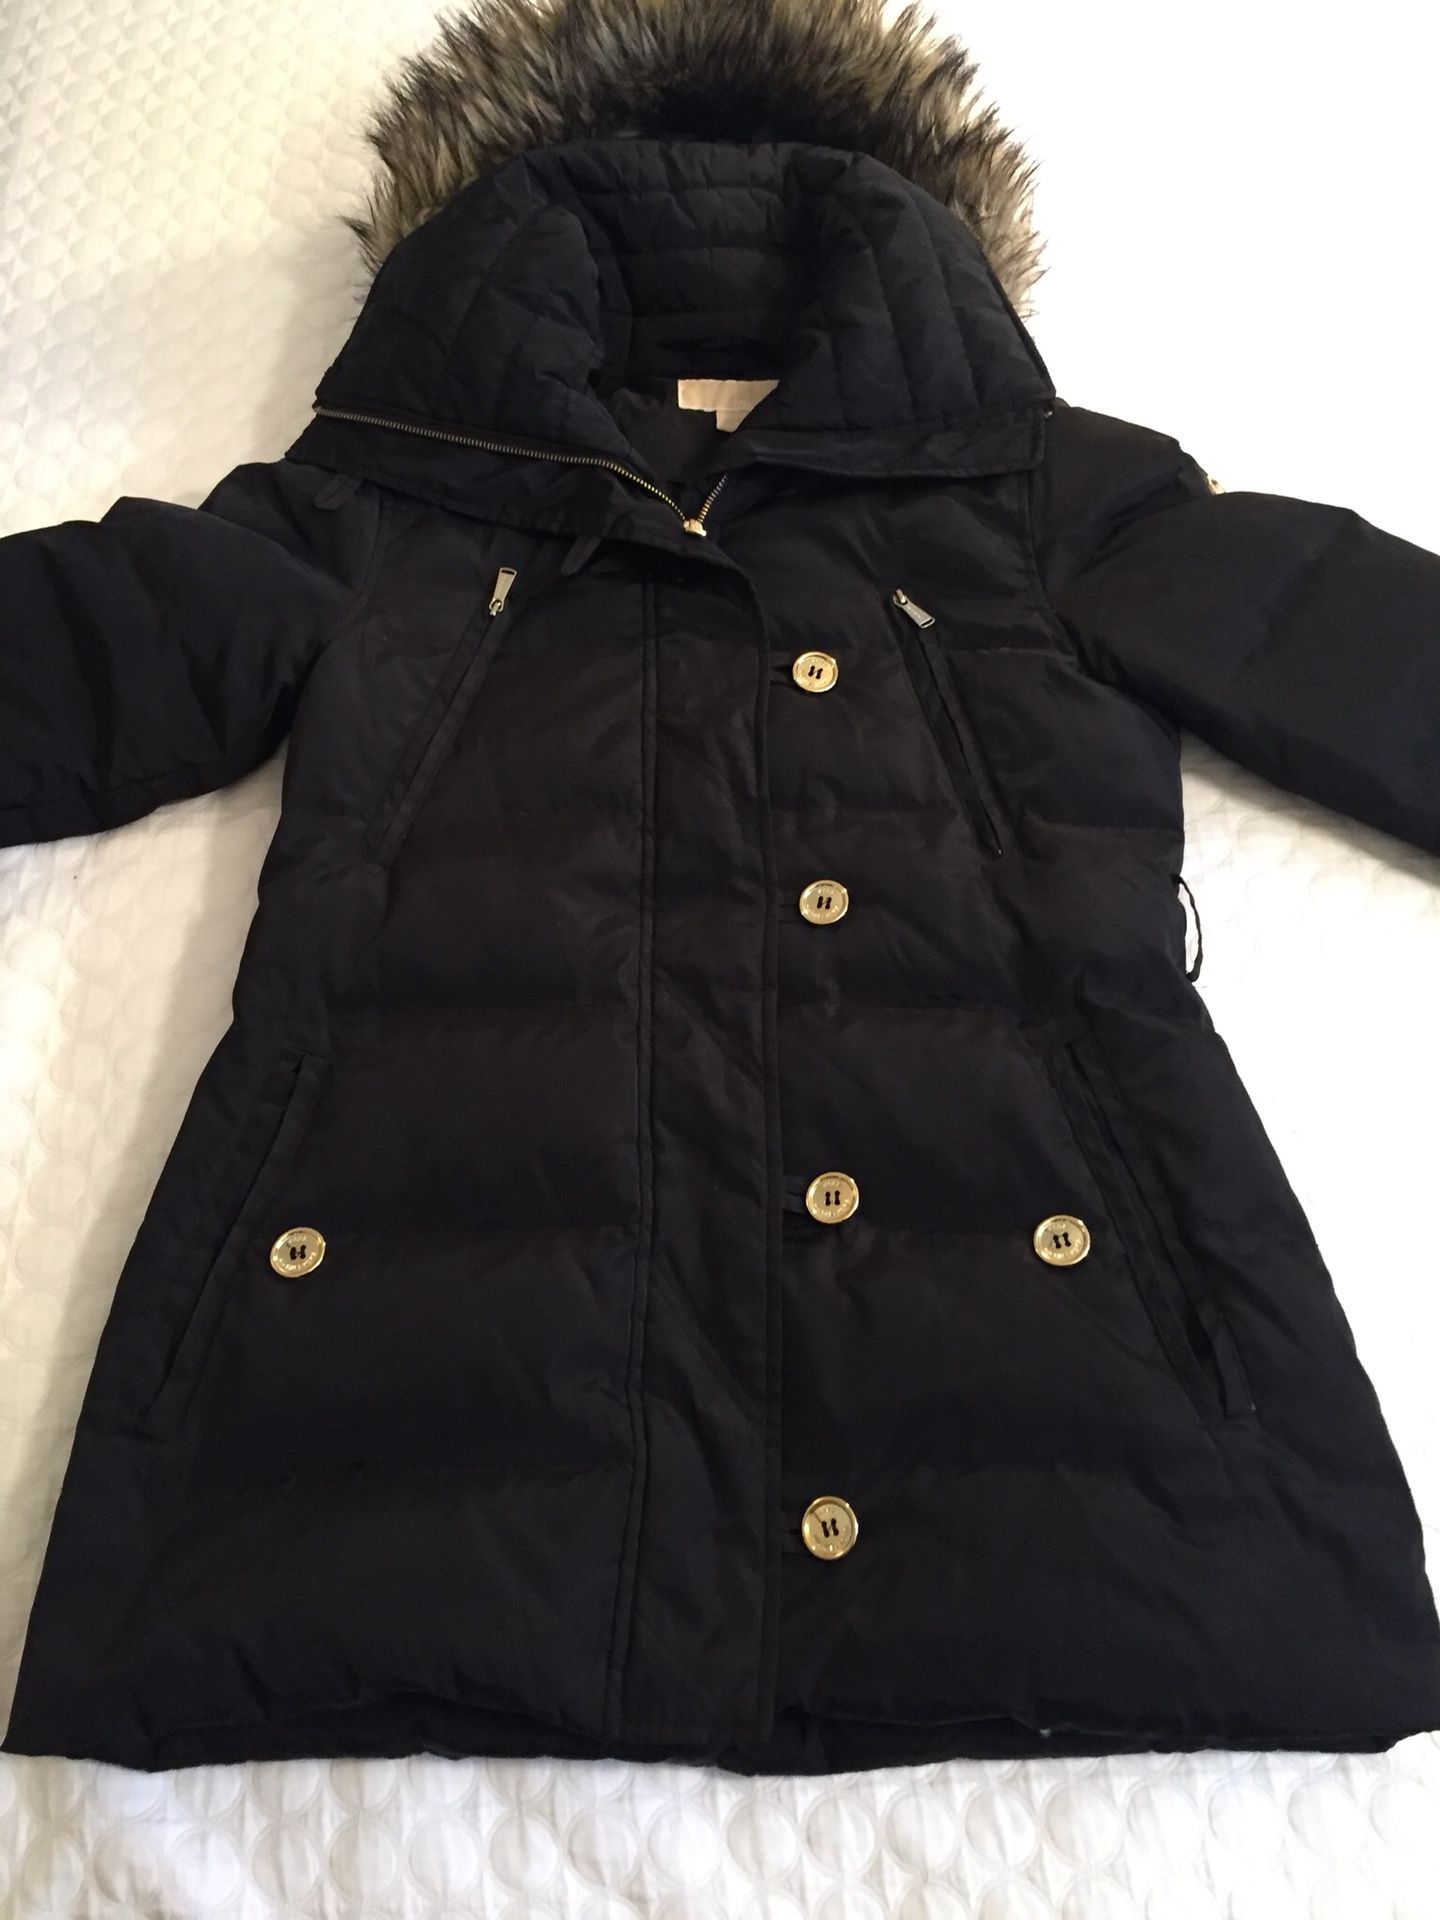 AMAZING FIND! MICHAEL KORS DOWN FILLED WOMANS JACKET. FUR COLLAR. SAVE.